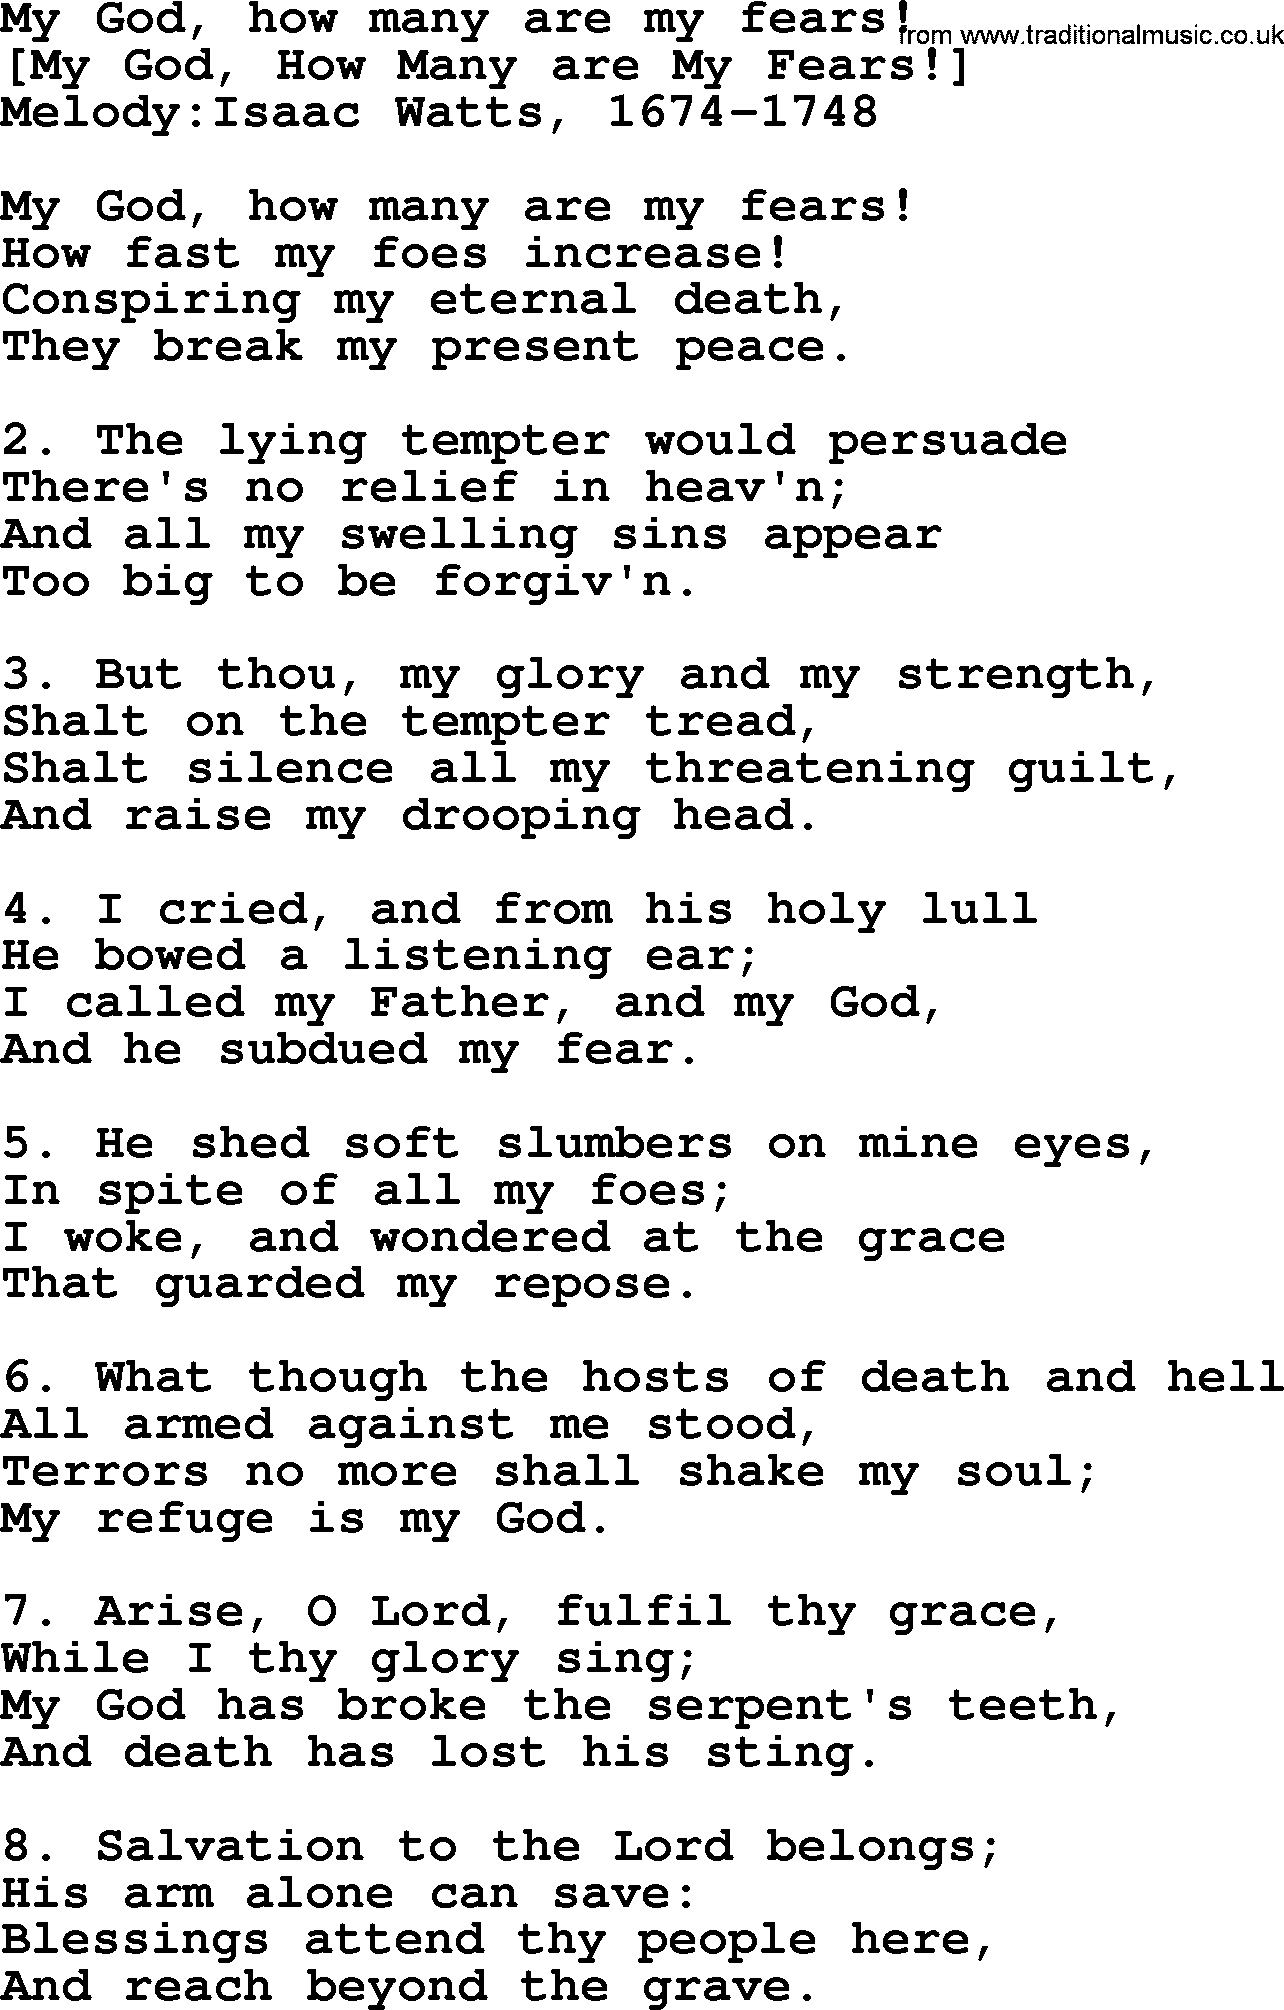 Old English Song: My God, How Many Are My Fears! lyrics